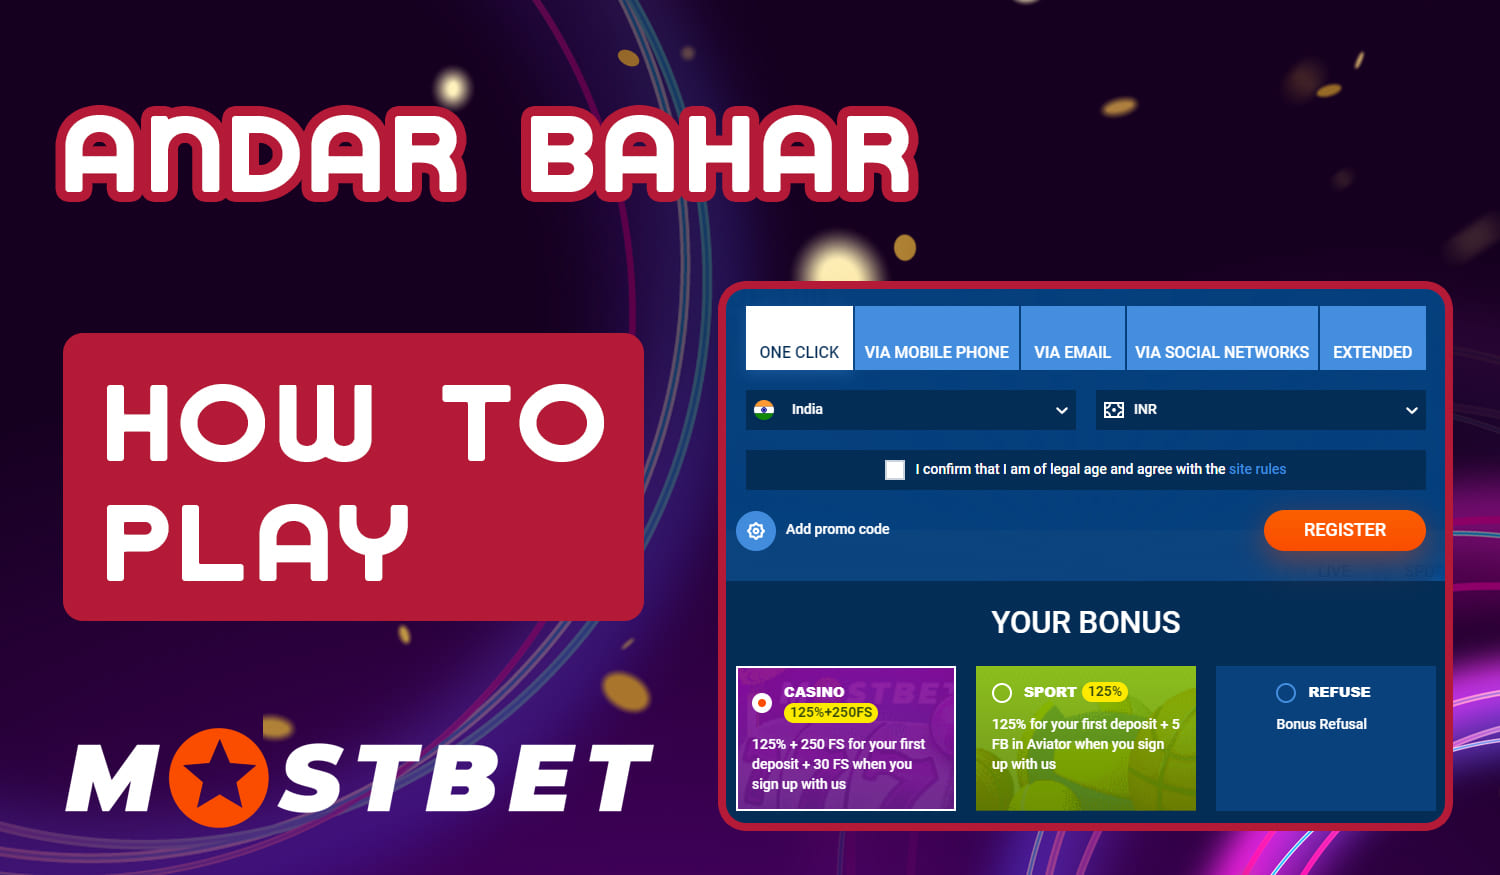 How Indian users can start playing Andar Bahar on Mostbet